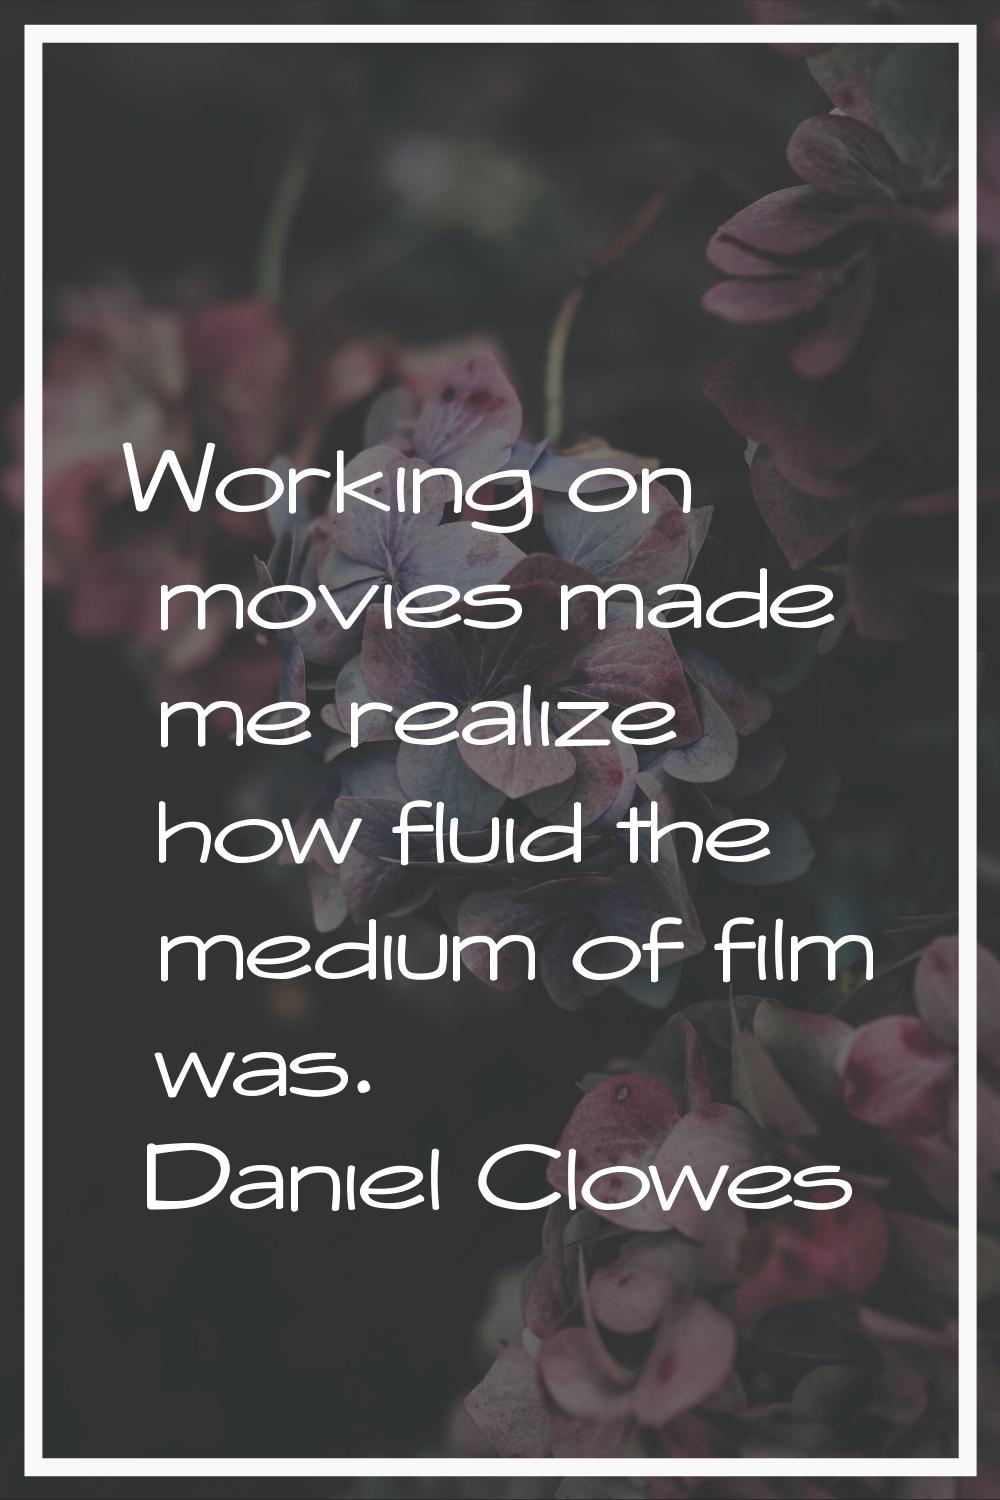 Working on movies made me realize how fluid the medium of film was.